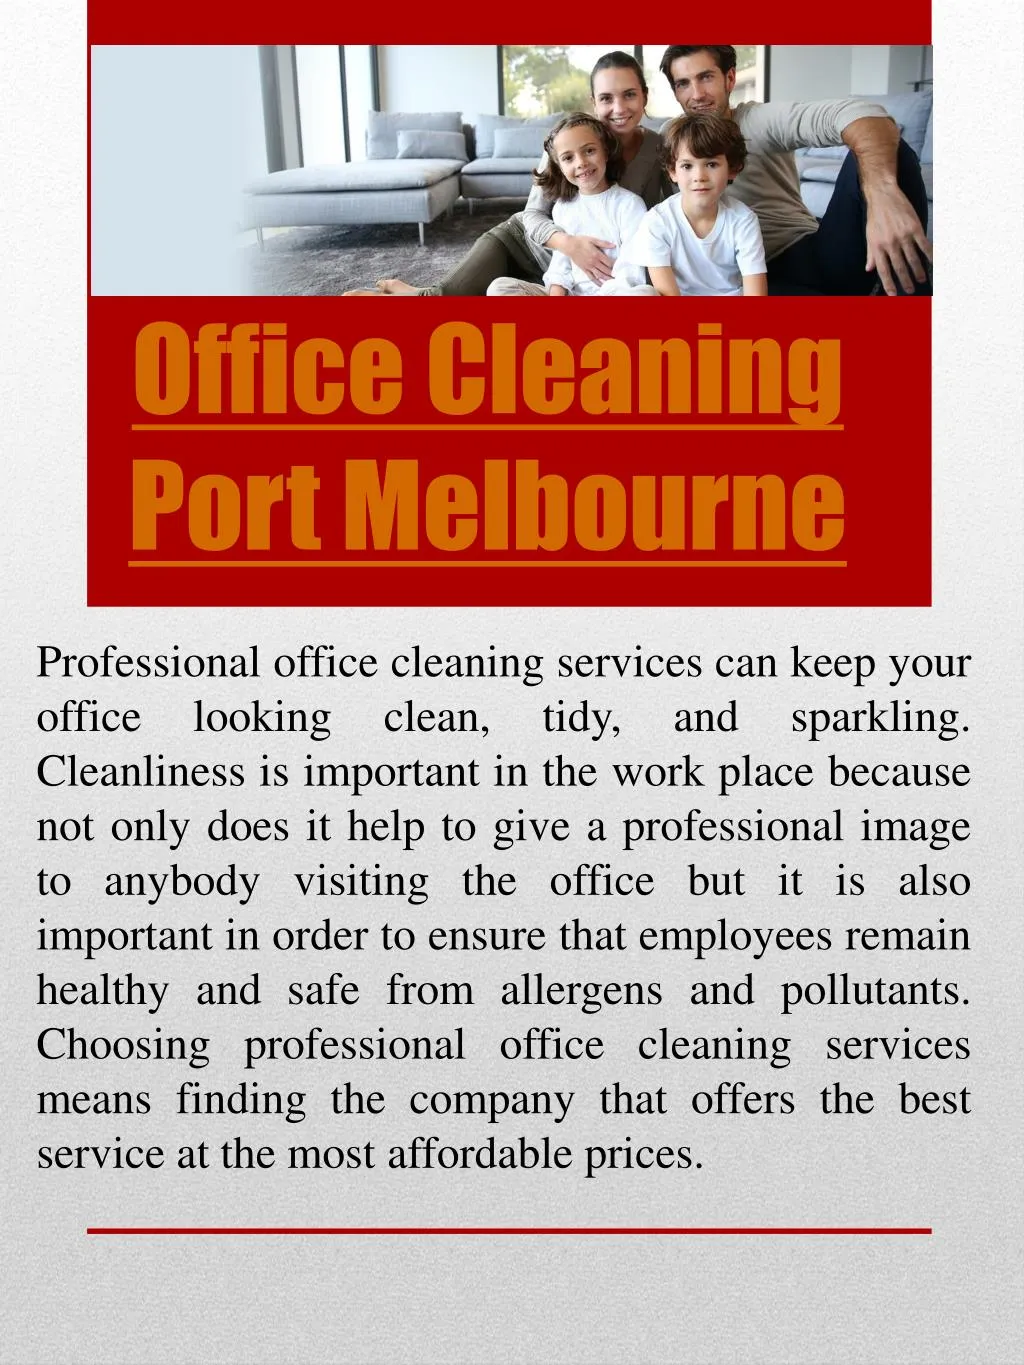 office cleaning port melbourne n.